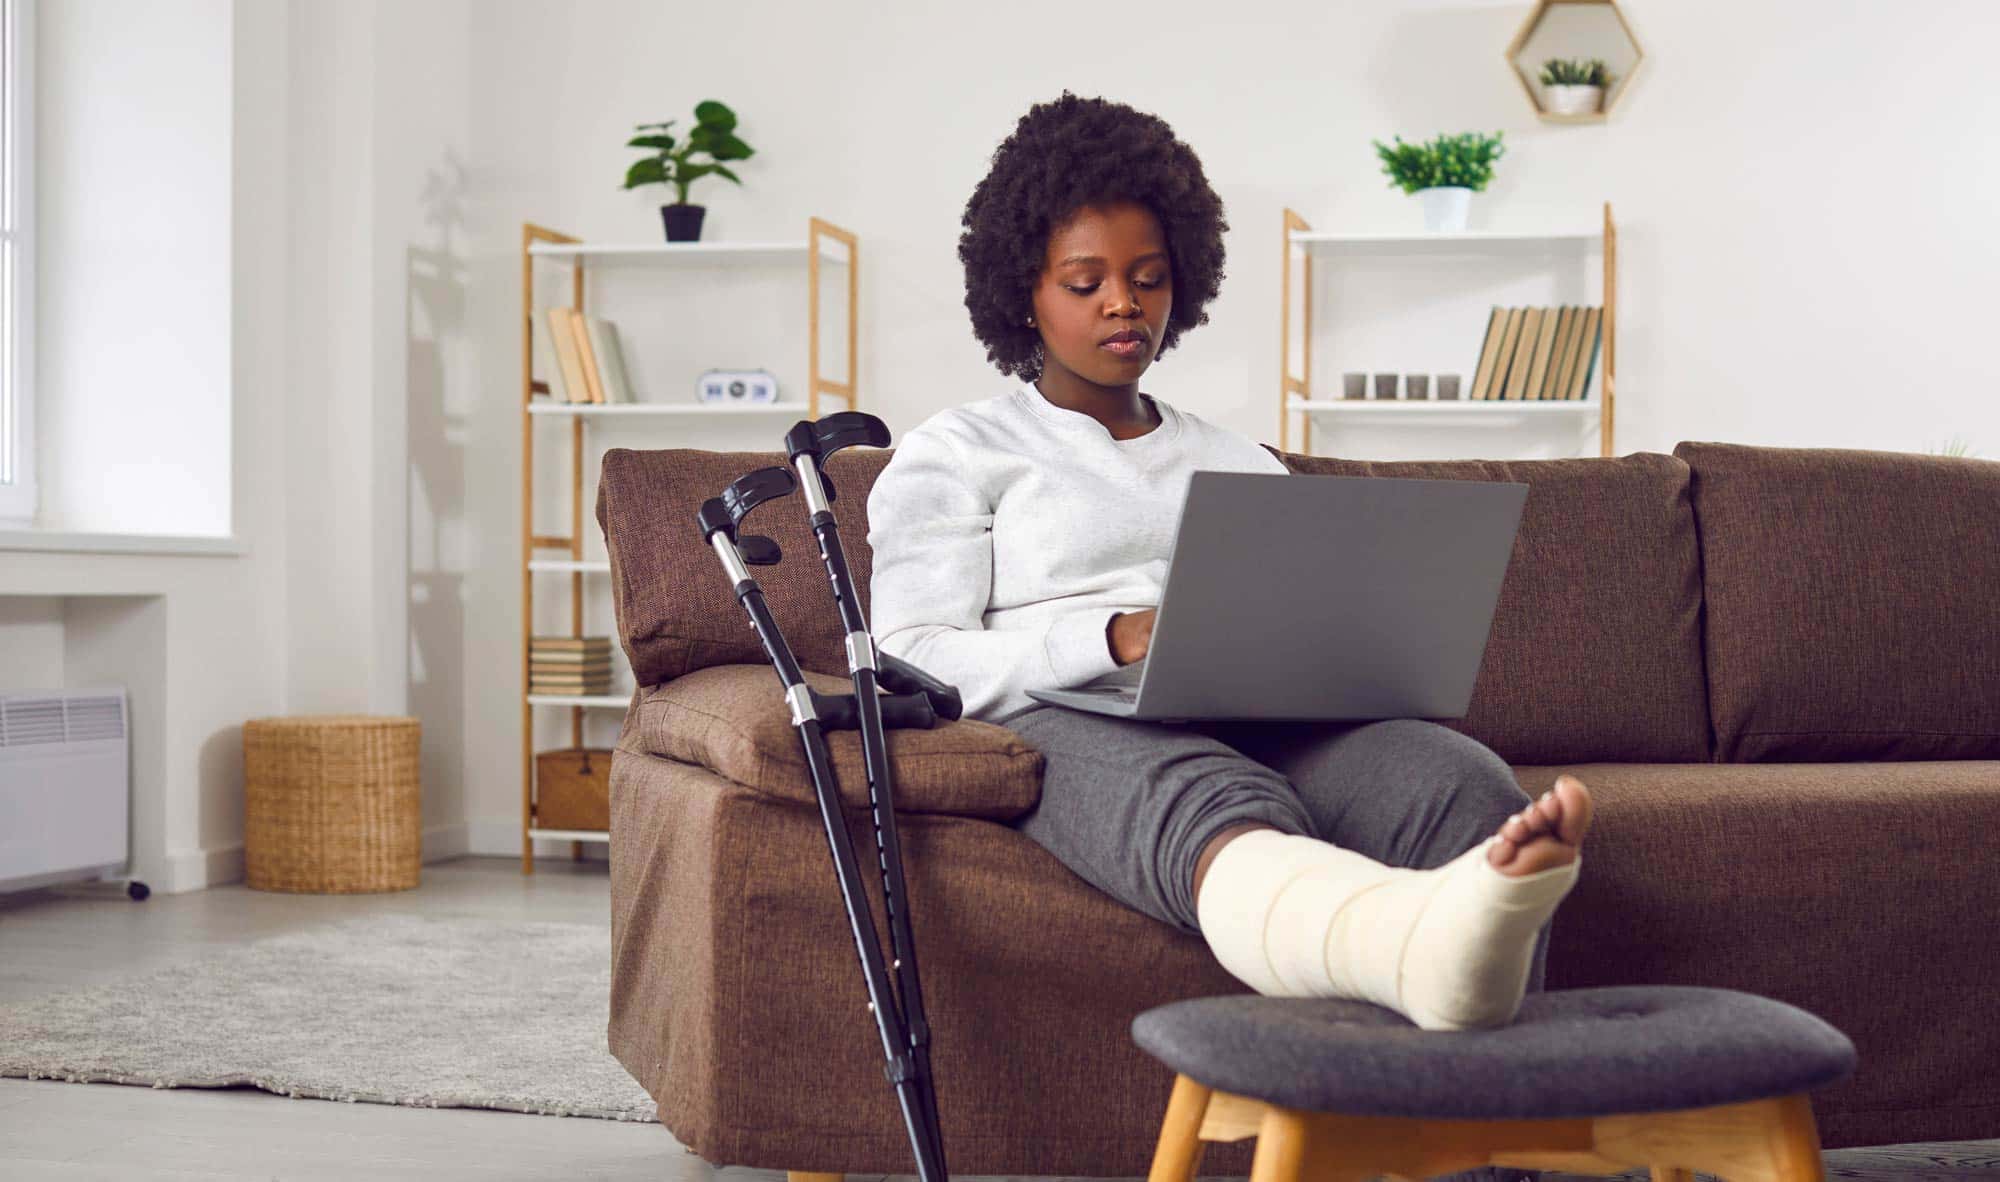 A woman with a leg injury doing research on a laptop